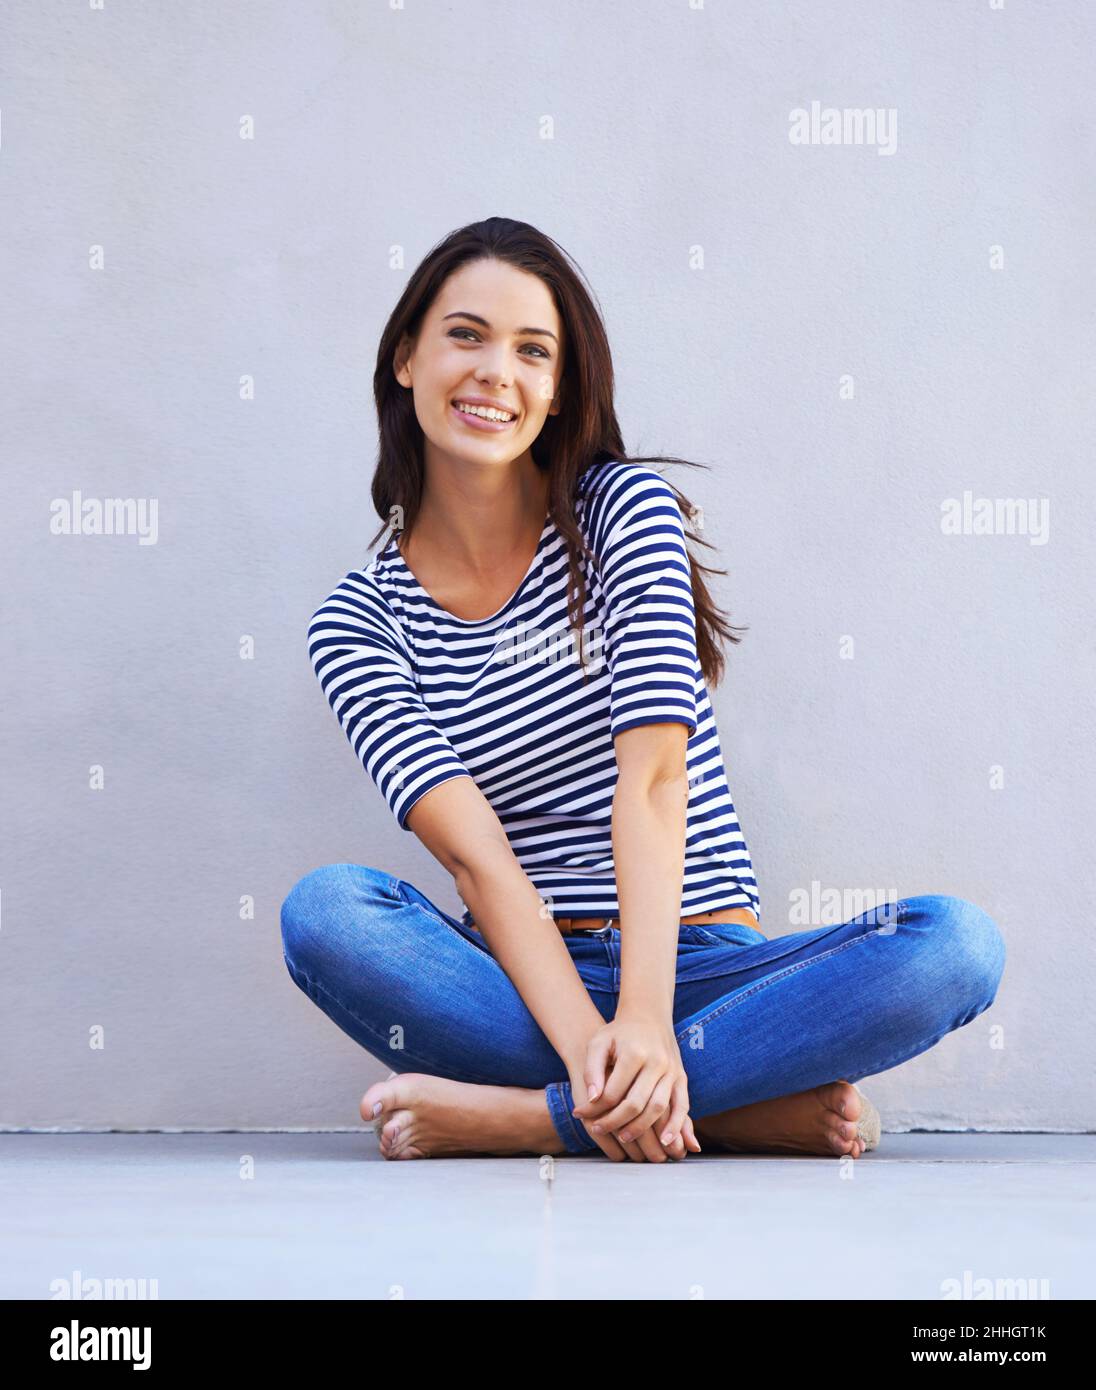 Happy being me. Full-length shot of a beautiful young woman sitting cross-legged on the floor. Stock Photo